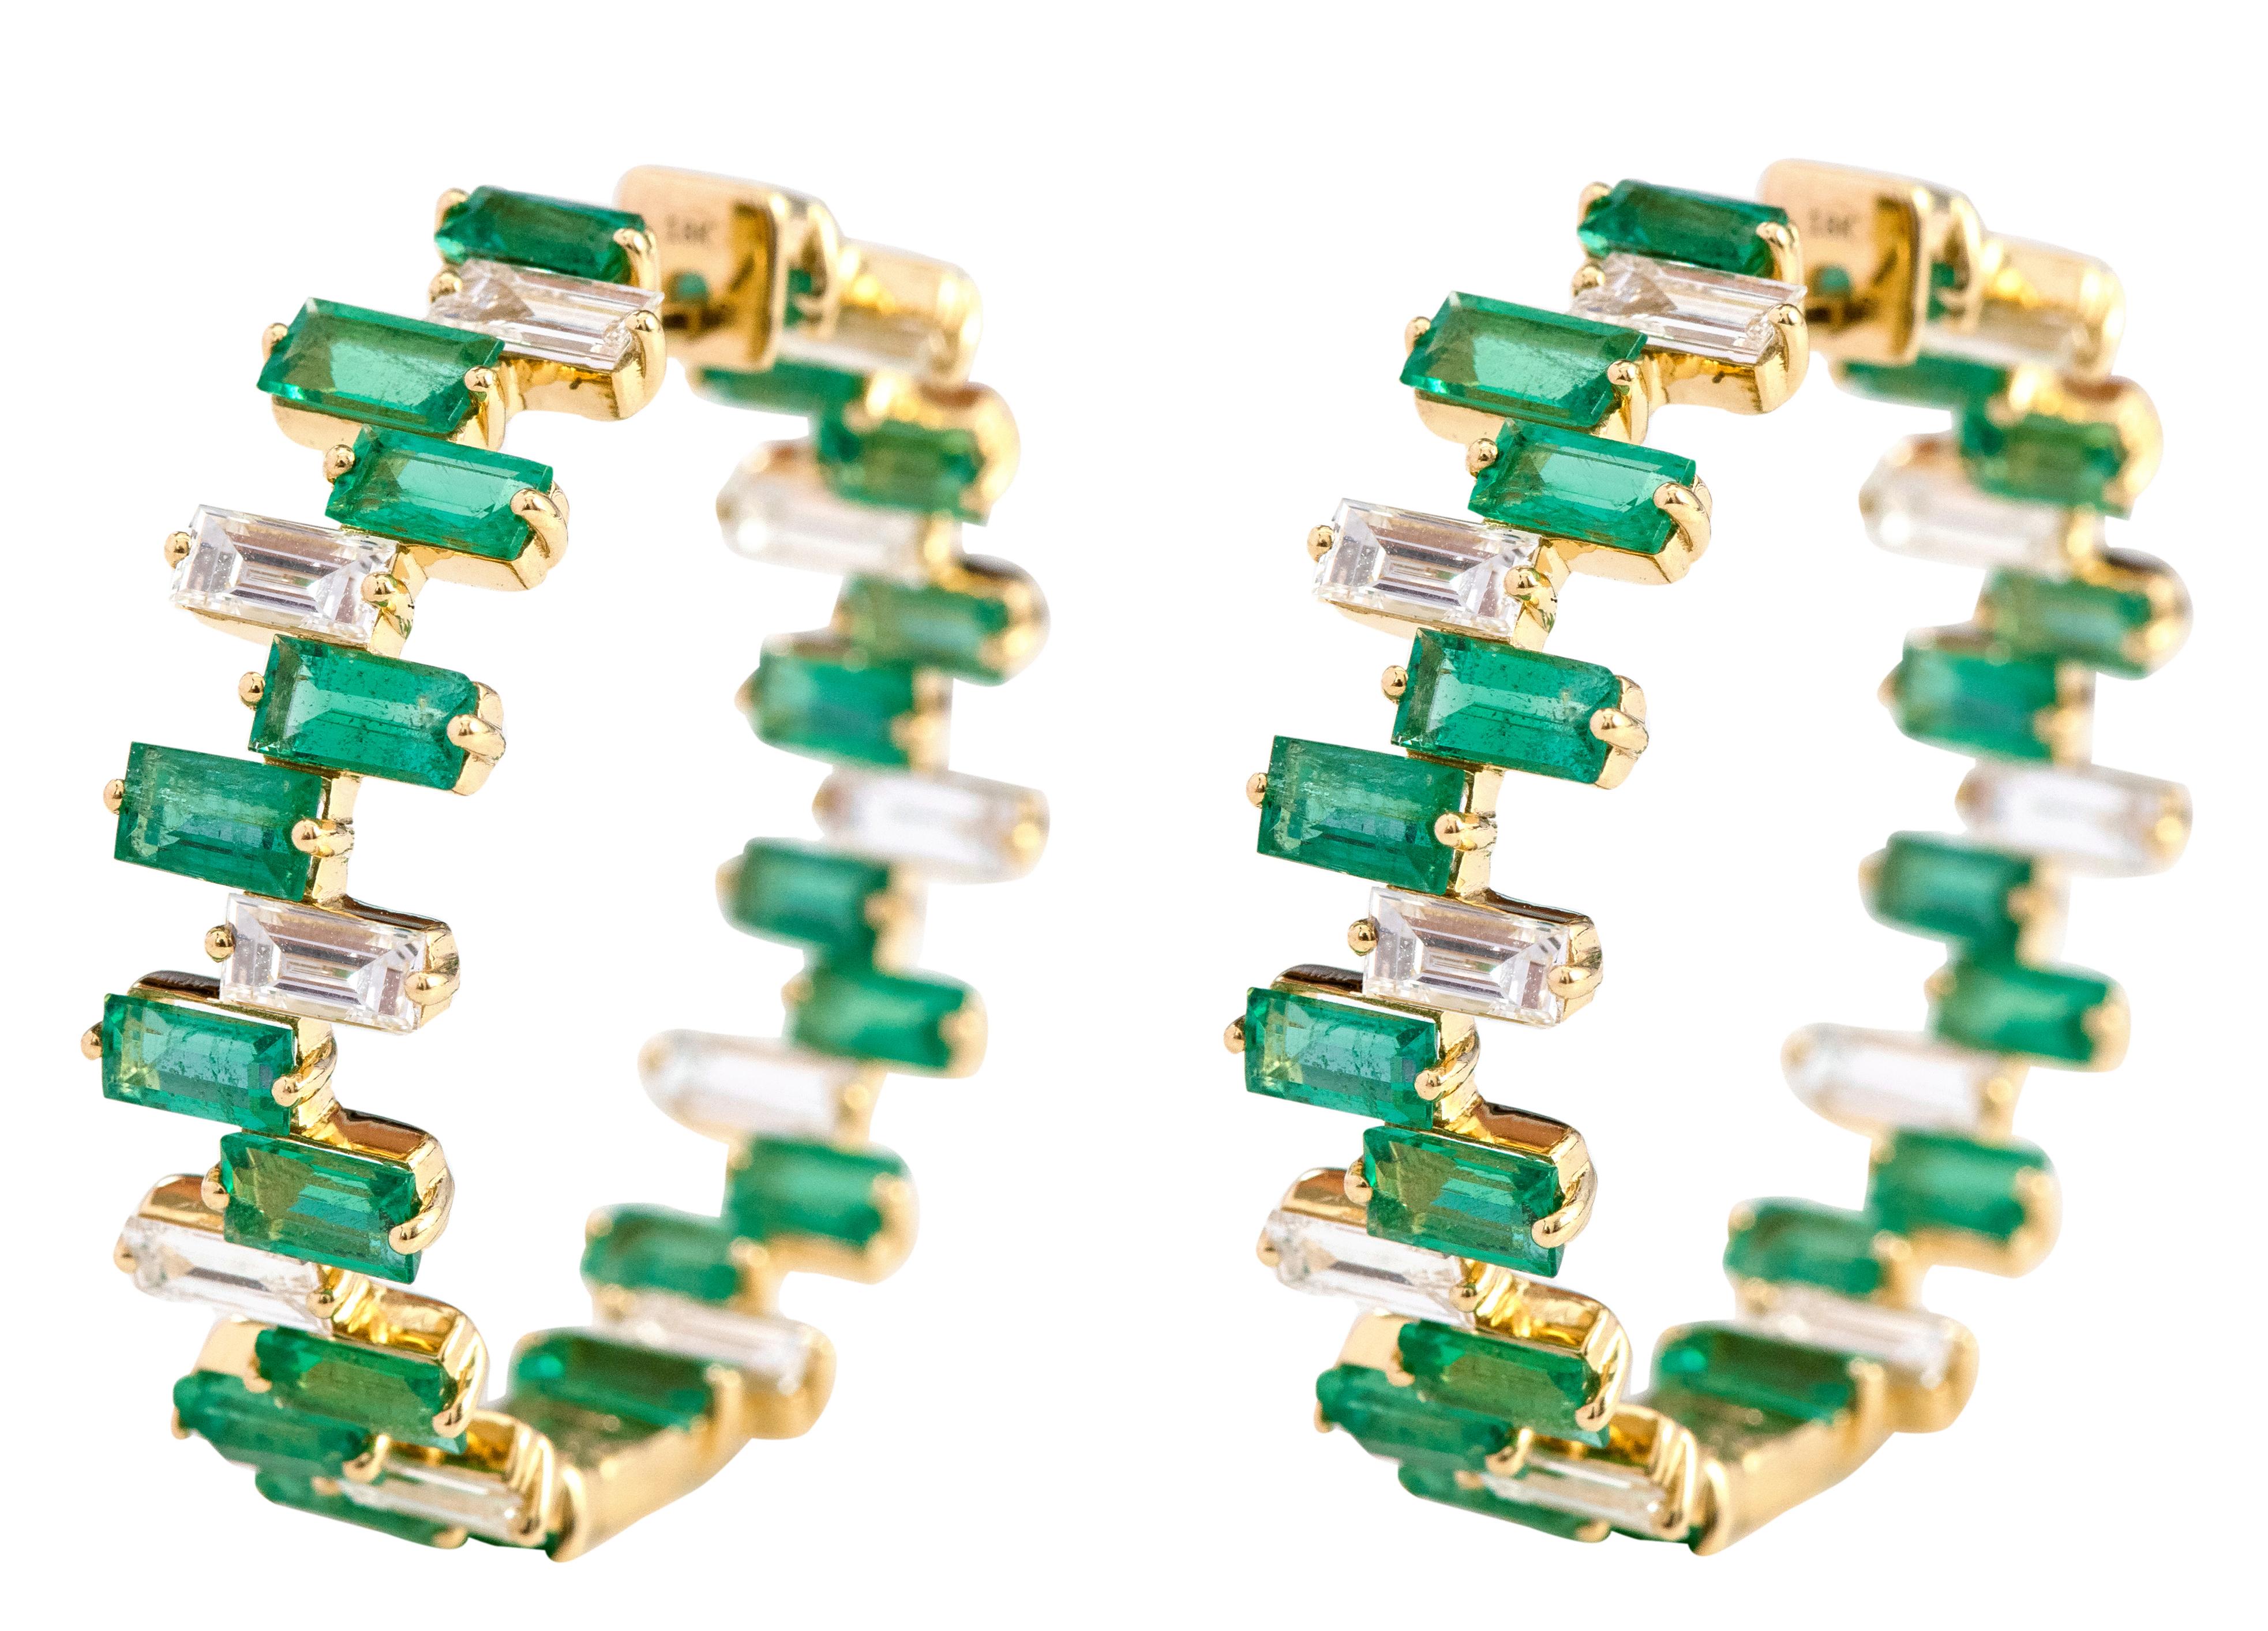 18 Karat Yellow Gold 11.50 Carats Natural Emerald and Diamond Hoop Earrings

This adorable and glamorous parakeet green emerald and diamond criss-cross hoop earring is splendid. The zig-zag formation of the two alternating solitaire mix size